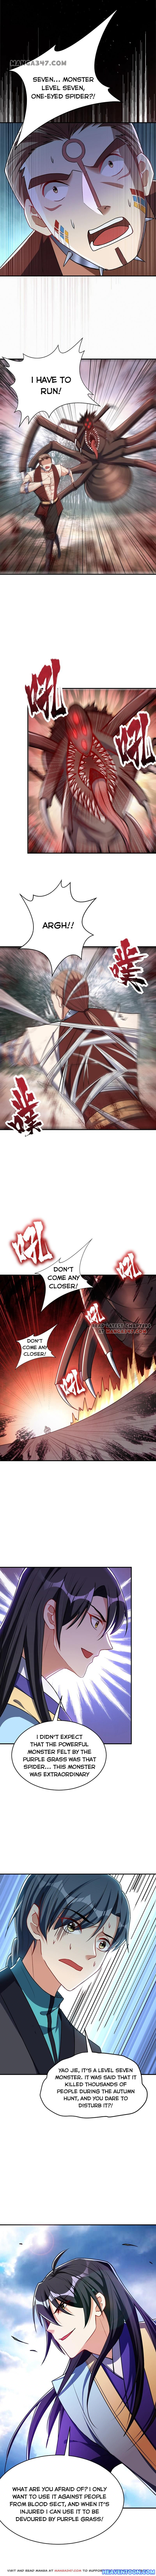 Rise of The Demon King Chap 135